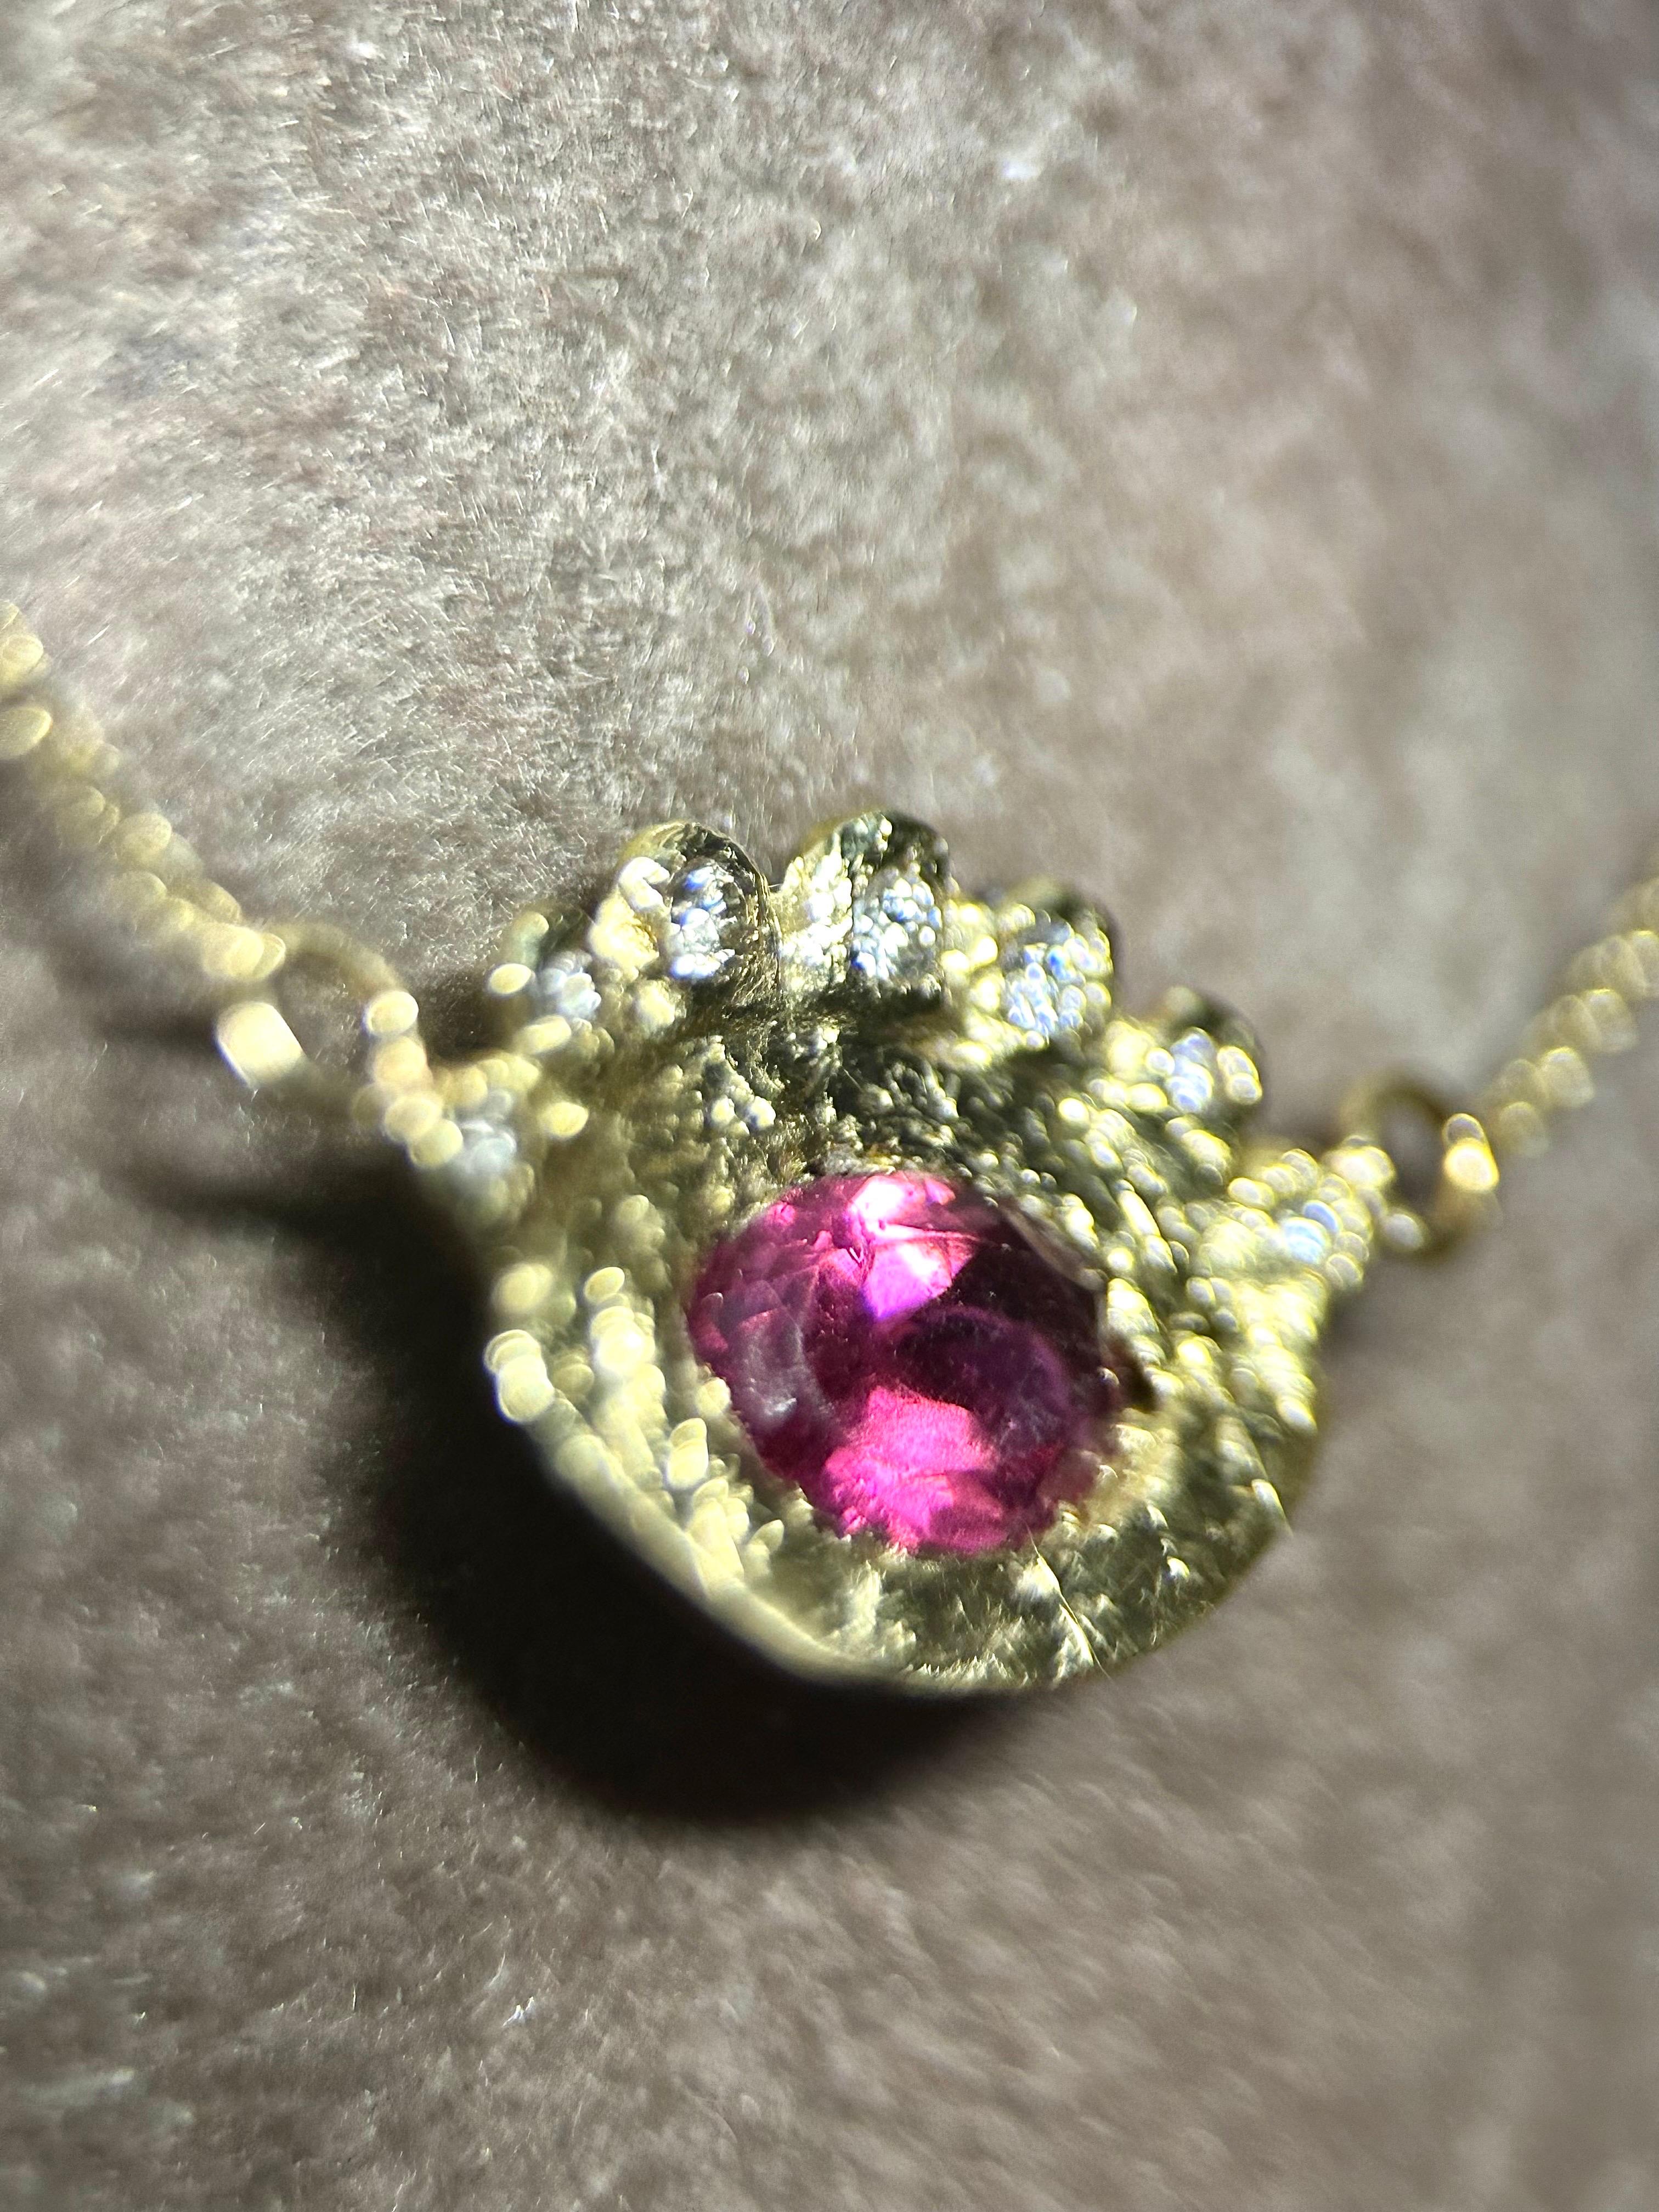 Oval Cut Hera’s Eye Rubellite Tourmaline with Diamonds Necklace in Gold in stock For Sale